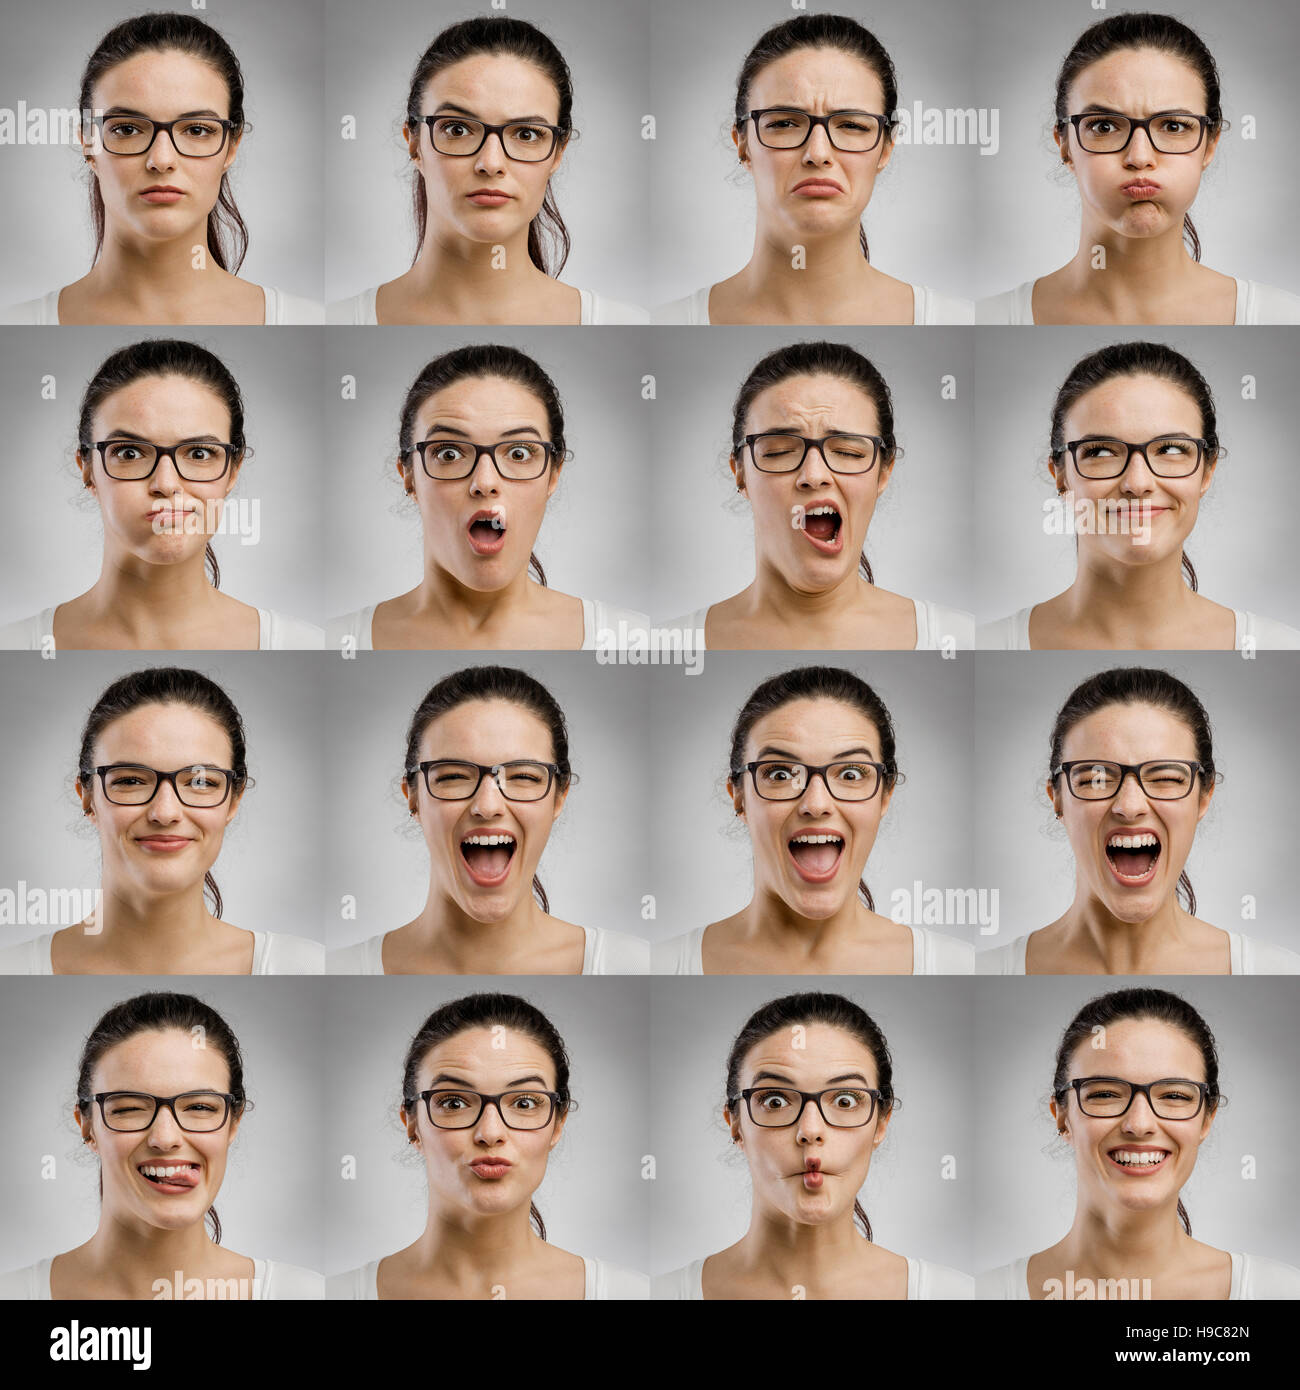 Multiple portraits of the same woman making diferent expressions Stock Photo